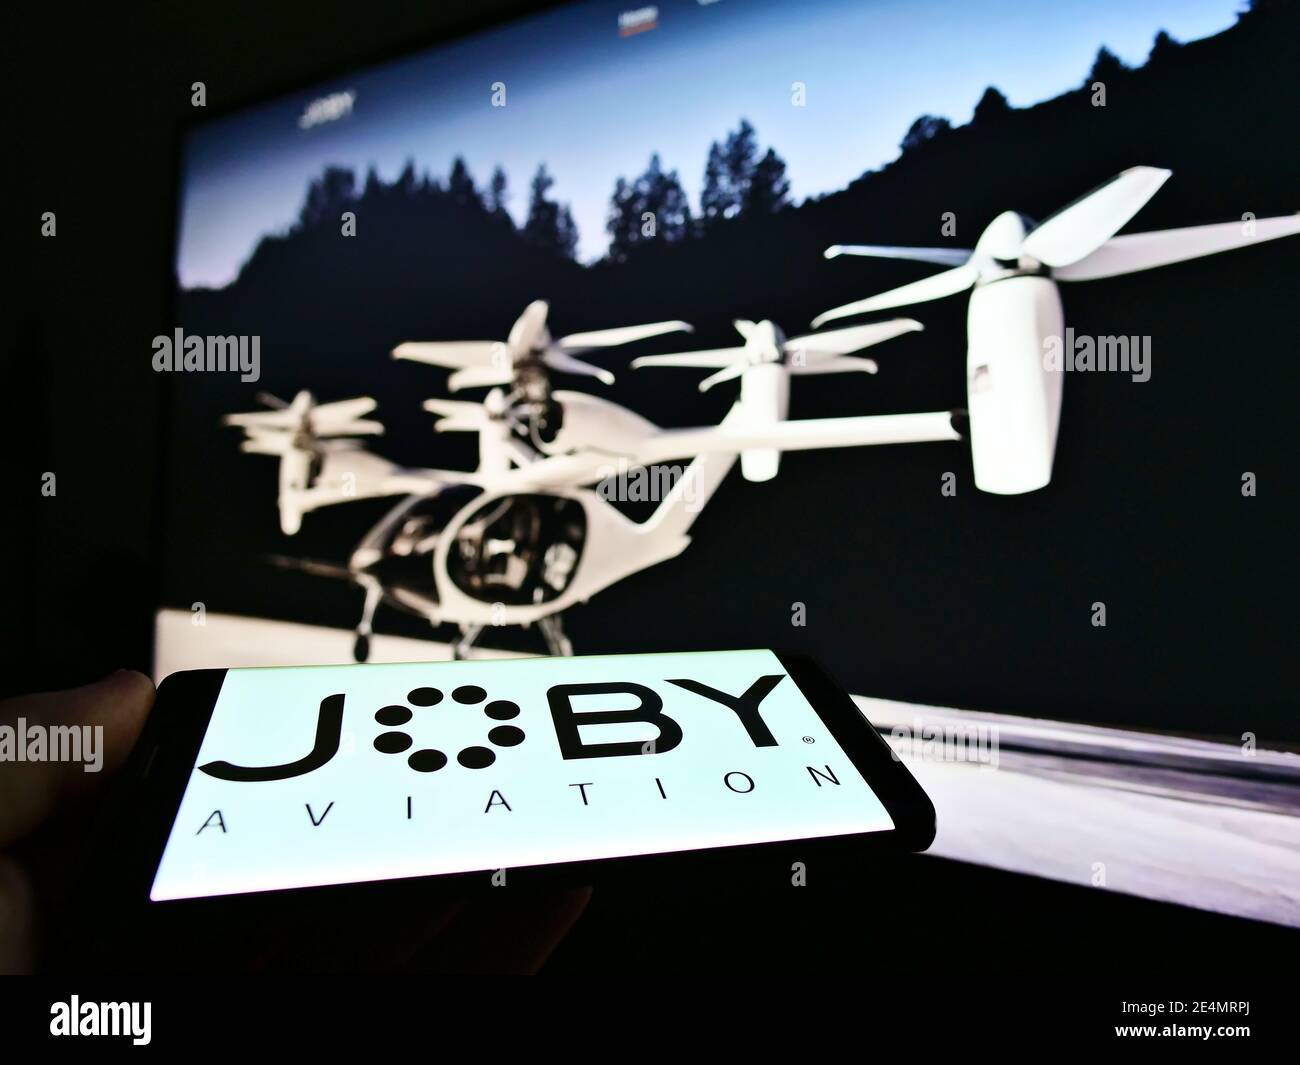 Person holding smartphone with logo of startup and aerospace company Joby Aviation (air taxi) on screen. Focus on top center of phone display. Stock Photo